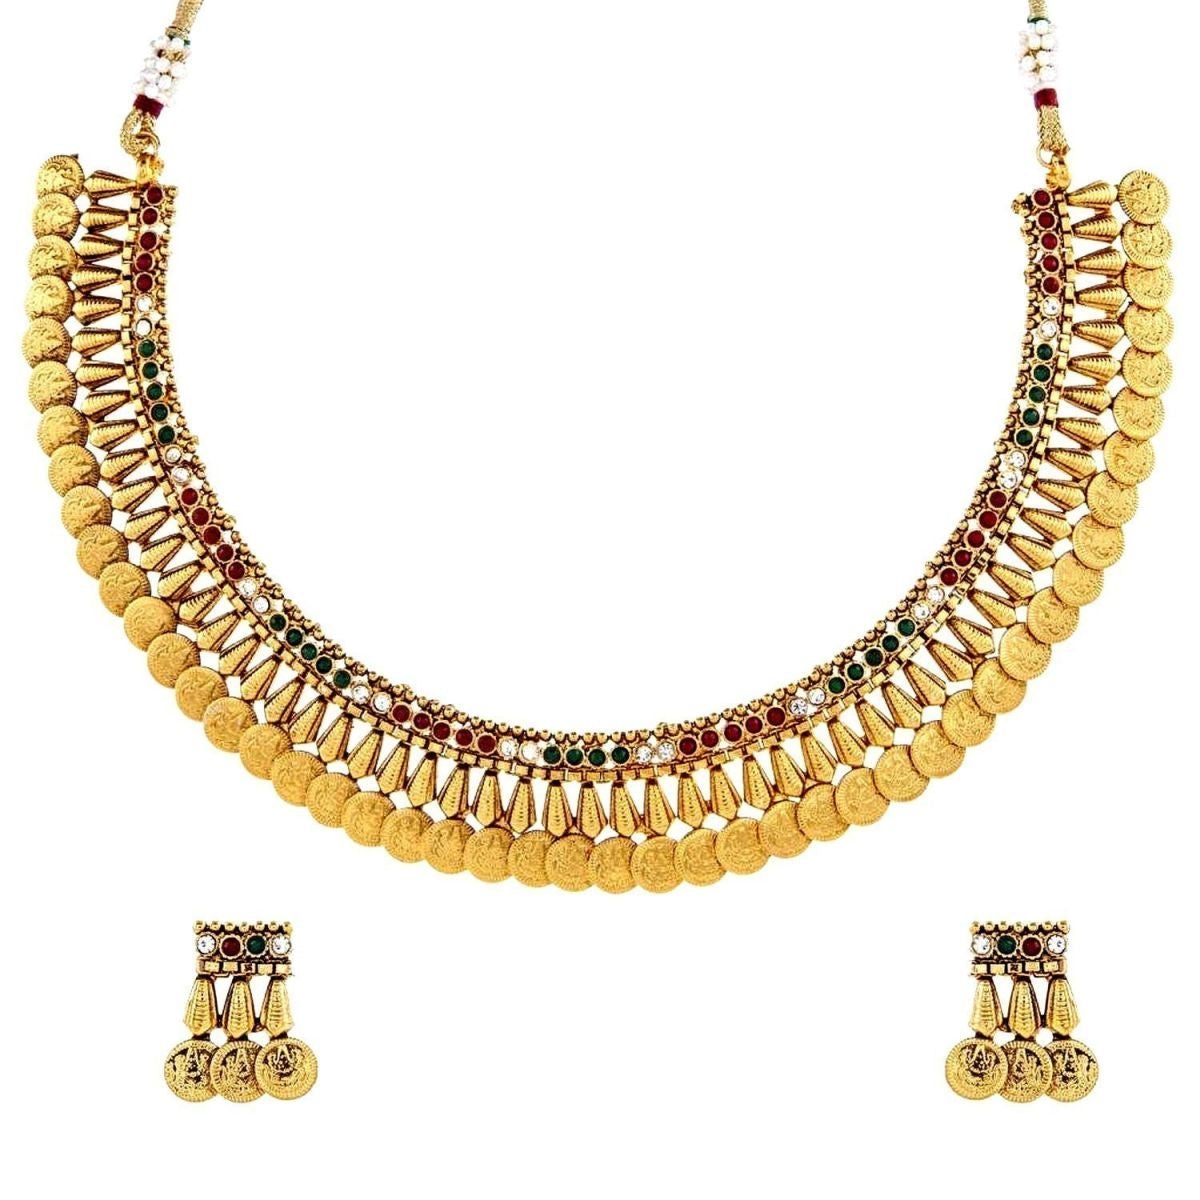 Antique Traditional Gold-Plated Choker Necklace For Women